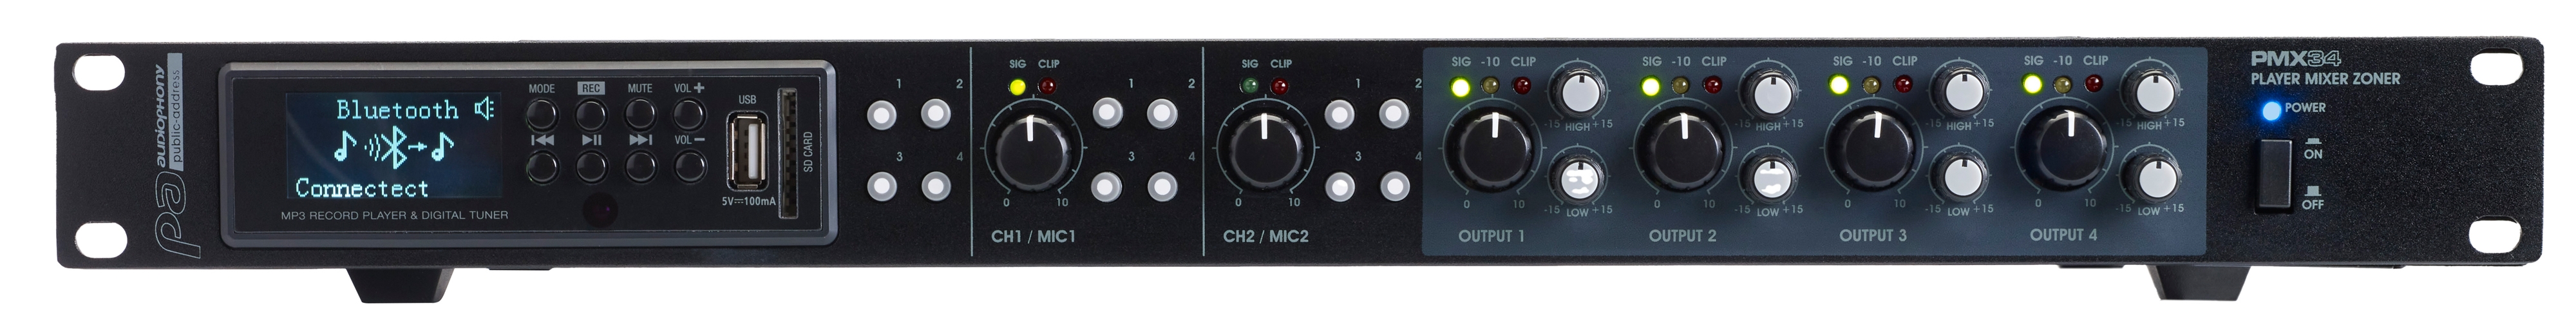 Mixer 2 inputs / 4 outputs with USB / SD / TUNER / Bluetooth media player